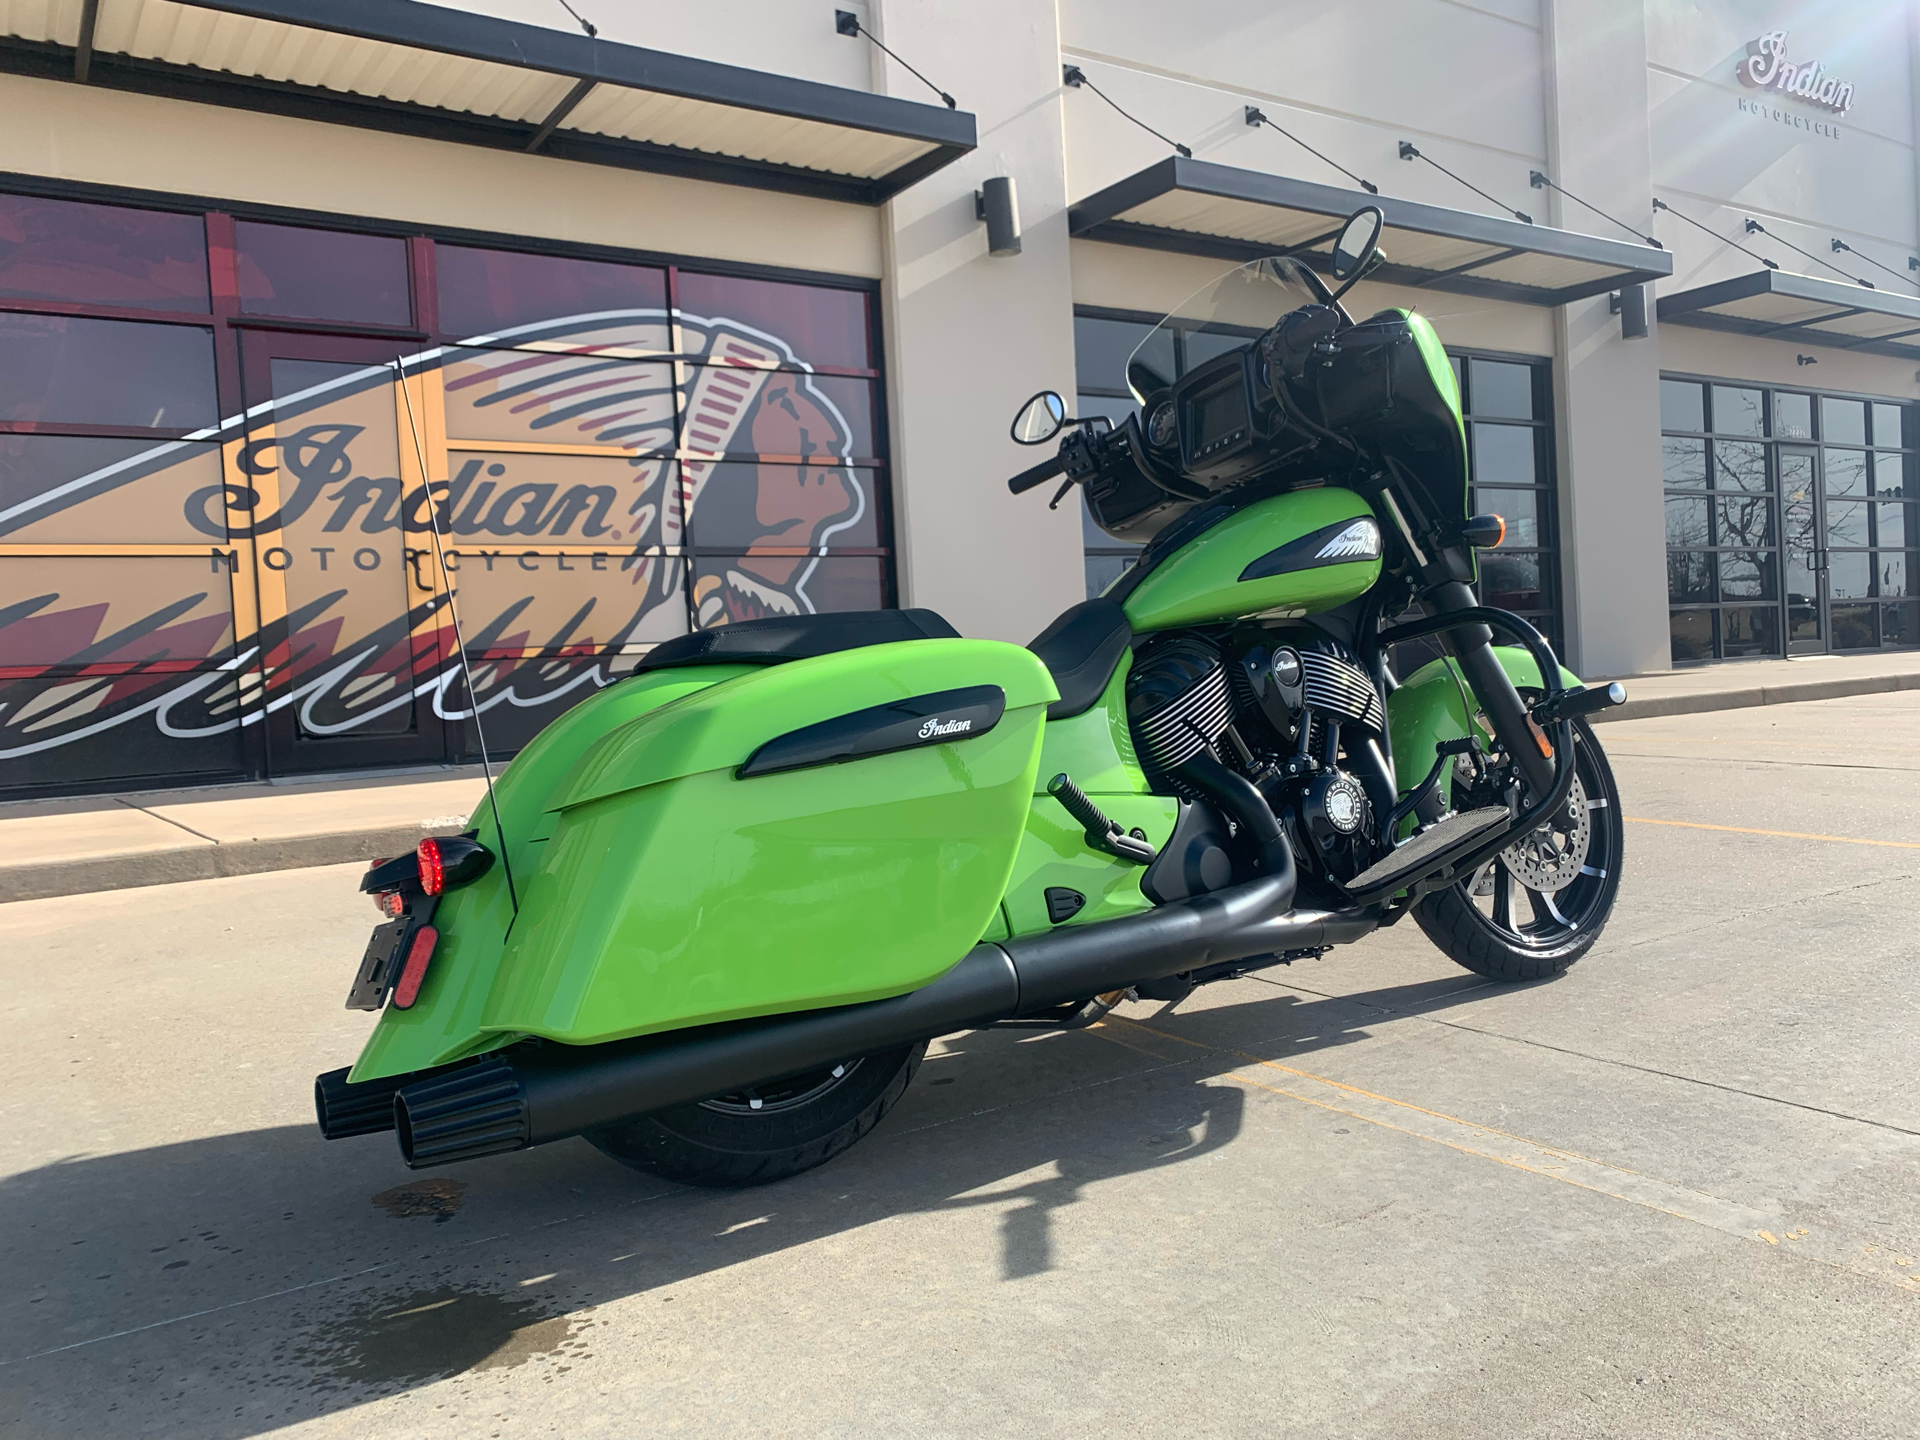 2019 Indian Chieftain® Dark Horse® ABS in Norman, Oklahoma - Photo 8